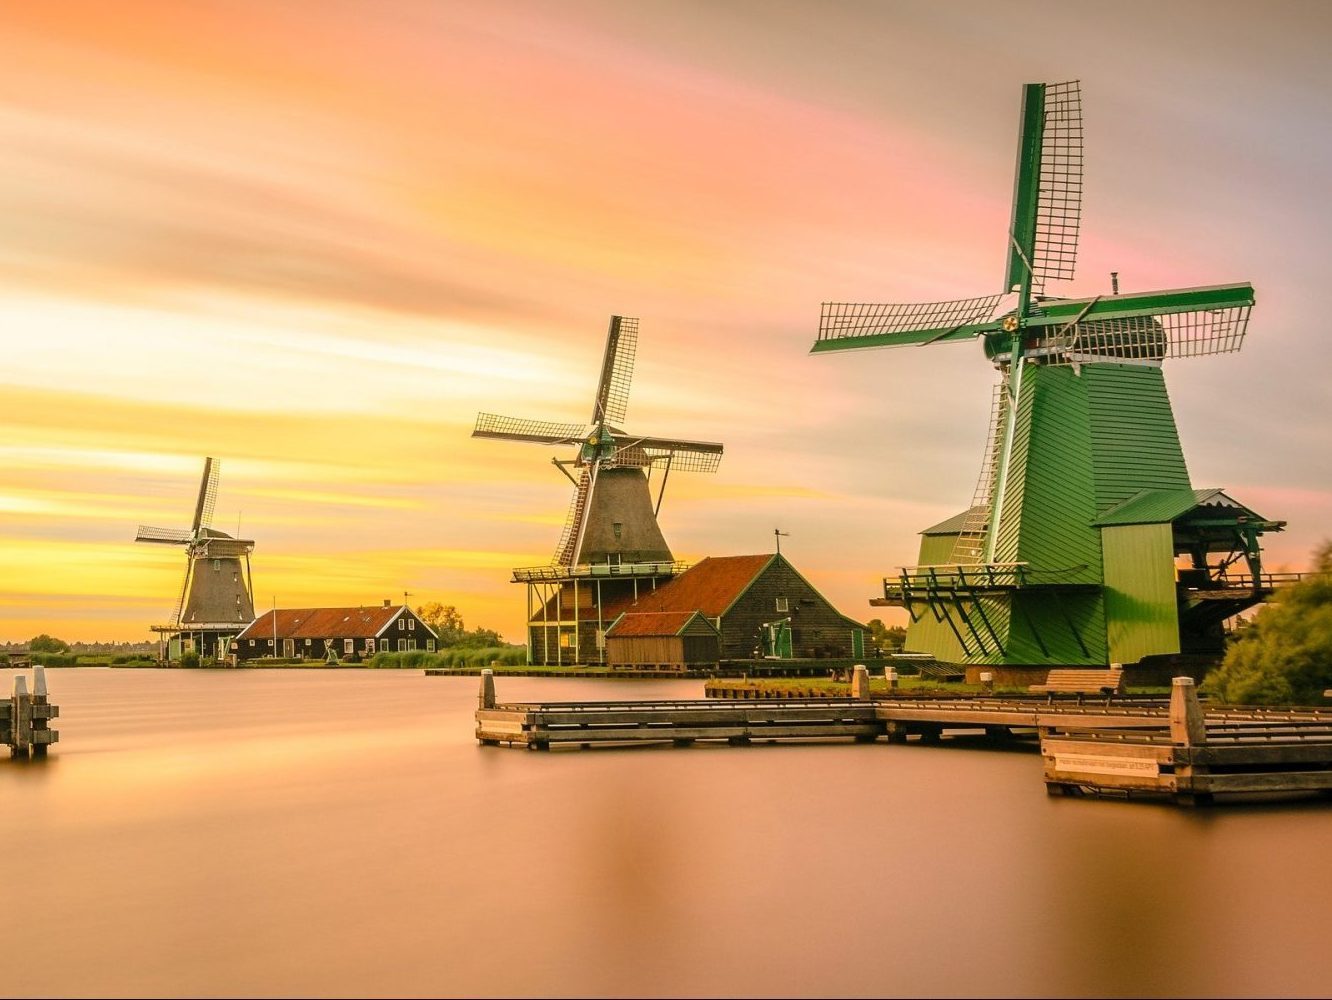 The Dutch countryside and Amsterdam windmills - We are Amsterdam